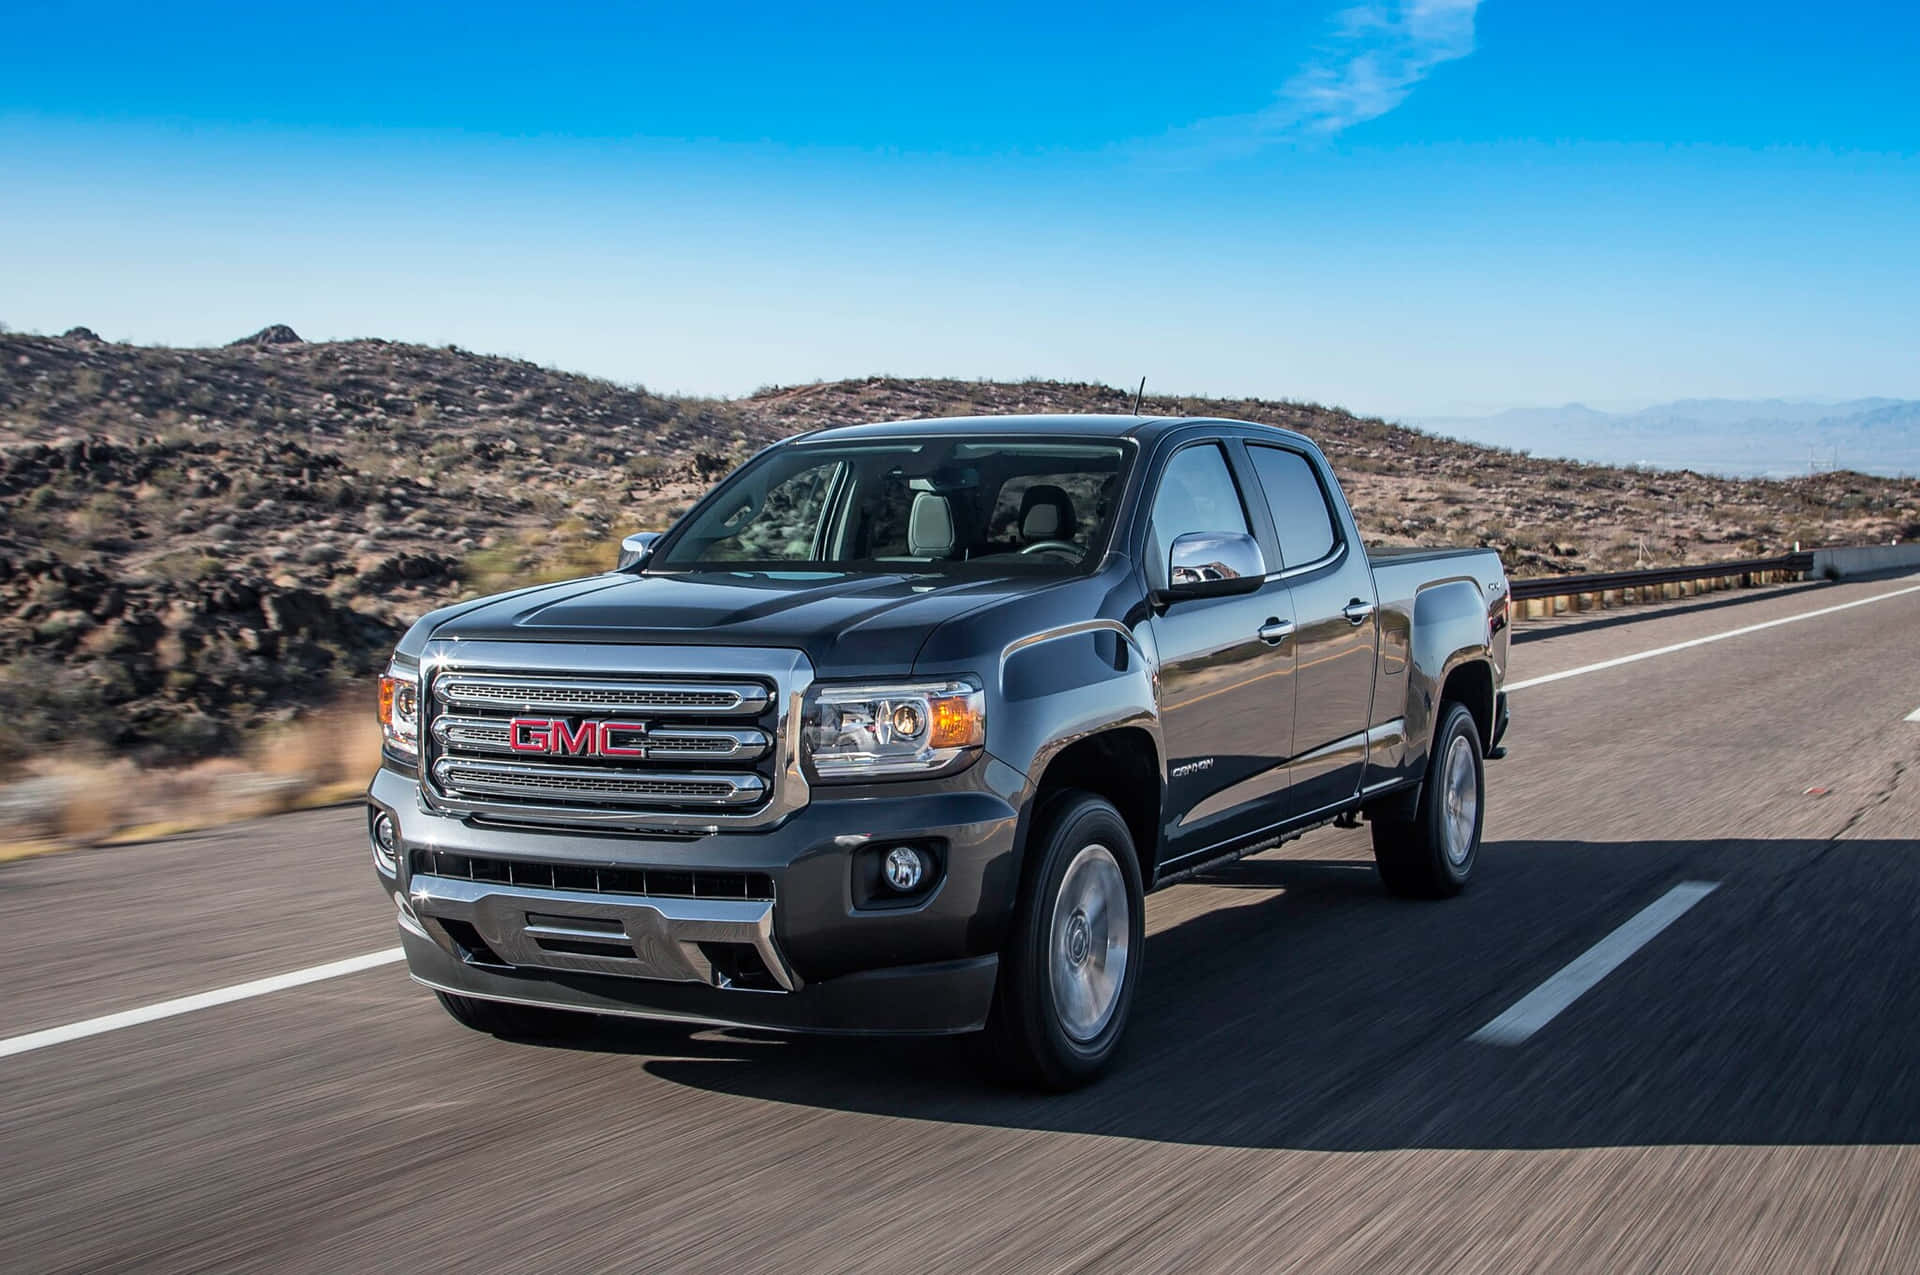 Stunning GMC Canyon in a Scenic Landscape Wallpaper